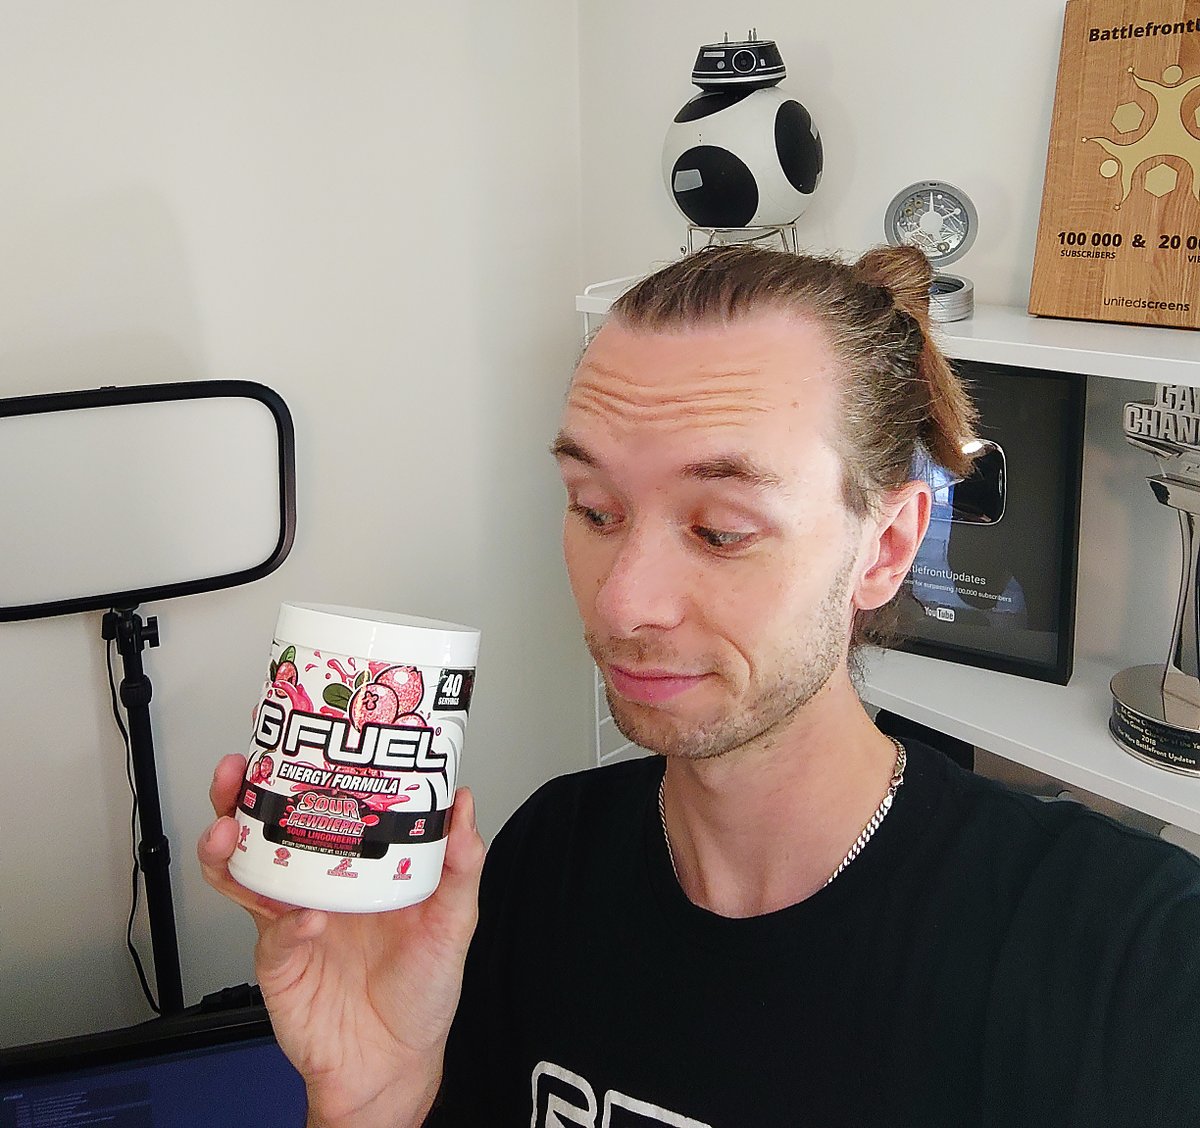 It's a Sour Pewdiepie @GFuelEnergy kind-of-day today! Grateful for all of you continuing to use code SHEEV when picking up GFuel, it'll get you at least 20% of your orders! If you haven't tried out GFuel yet, they have some 🔥starter kits: gfuel.ly/2GFhb6m #ad